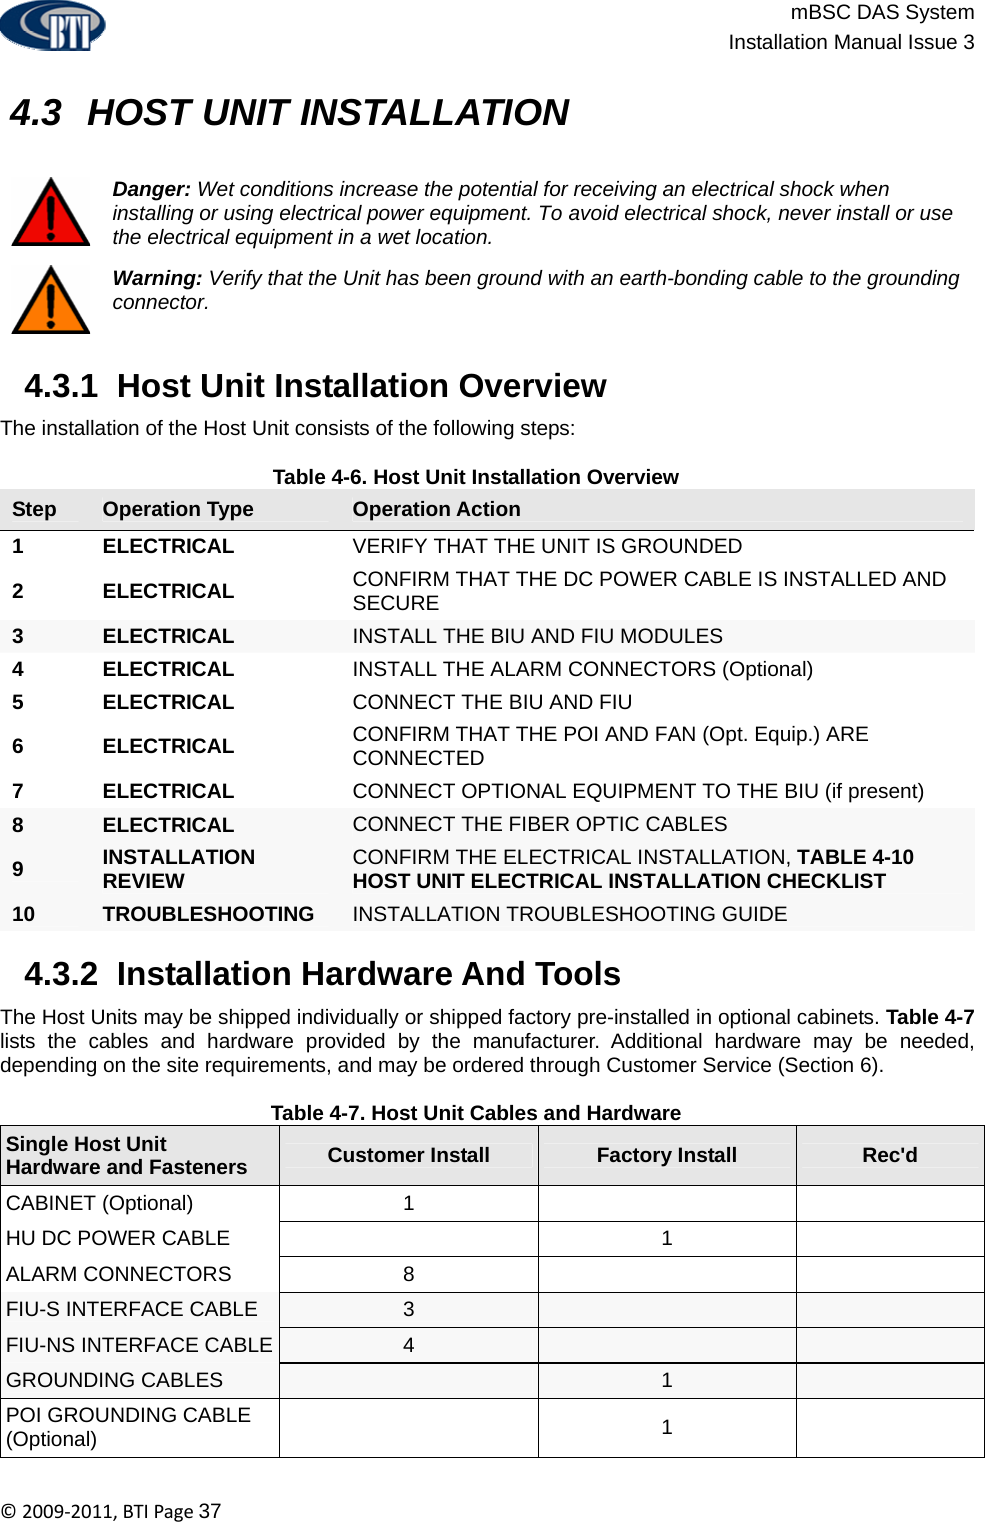                          mBSC DAS System  Installation Manual Issue 3  ©2009‐2011,BTIPage37   4.3  HOST UNIT INSTALLATION   Danger: Wet conditions increase the potential for receiving an electrical shock when installing or using electrical power equipment. To avoid electrical shock, never install or use the electrical equipment in a wet location.  Warning: Verify that the Unit has been ground with an earth-bonding cable to the grounding connector.   4.3.1  Host Unit Installation Overview The installation of the Host Unit consists of the following steps:  Table 4-6. Host Unit Installation Overview Step  Operation Type  Operation Action 1 ELECTRICAL  VERIFY THAT THE UNIT IS GROUNDED 2 ELECTRICAL  CONFIRM THAT THE DC POWER CABLE IS INSTALLED AND SECURE 3  ELECTRICAL  INSTALL THE BIU AND FIU MODULES 4 ELECTRICAL  INSTALL THE ALARM CONNECTORS (Optional) 5 ELECTRICAL  CONNECT THE BIU AND FIU 6 ELECTRICAL  CONFIRM THAT THE POI AND FAN (Opt. Equip.) ARE CONNECTED 7 ELECTRICAL  CONNECT OPTIONAL EQUIPMENT TO THE BIU (if present) 8  ELECTRICAL  CONNECT THE FIBER OPTIC CABLES 9  INSTALLATION REVIEW  CONFIRM THE ELECTRICAL INSTALLATION, TABLE 4-10 HOST UNIT ELECTRICAL INSTALLATION CHECKLIST 10  TROUBLESHOOTING  INSTALLATION TROUBLESHOOTING GUIDE   4.3.2  Installation Hardware And Tools The Host Units may be shipped individually or shipped factory pre-installed in optional cabinets. Table 4-7 lists the cables and hardware provided by the manufacturer. Additional hardware may be needed, depending on the site requirements, and may be ordered through Customer Service (Section 6).  Table 4-7. Host Unit Cables and Hardware Single Host Unit  Hardware and Fasteners  Customer Install  Factory Install  Rec&apos;d CABINET (Optional)  1     HU DC POWER CABLE    1   ALARM CONNECTORS  8     FIU-S INTERFACE CABLE  3     FIU-NS INTERFACE CABLE  4     GROUNDING CABLES   1   POI GROUNDING CABLE (Optional)   1  